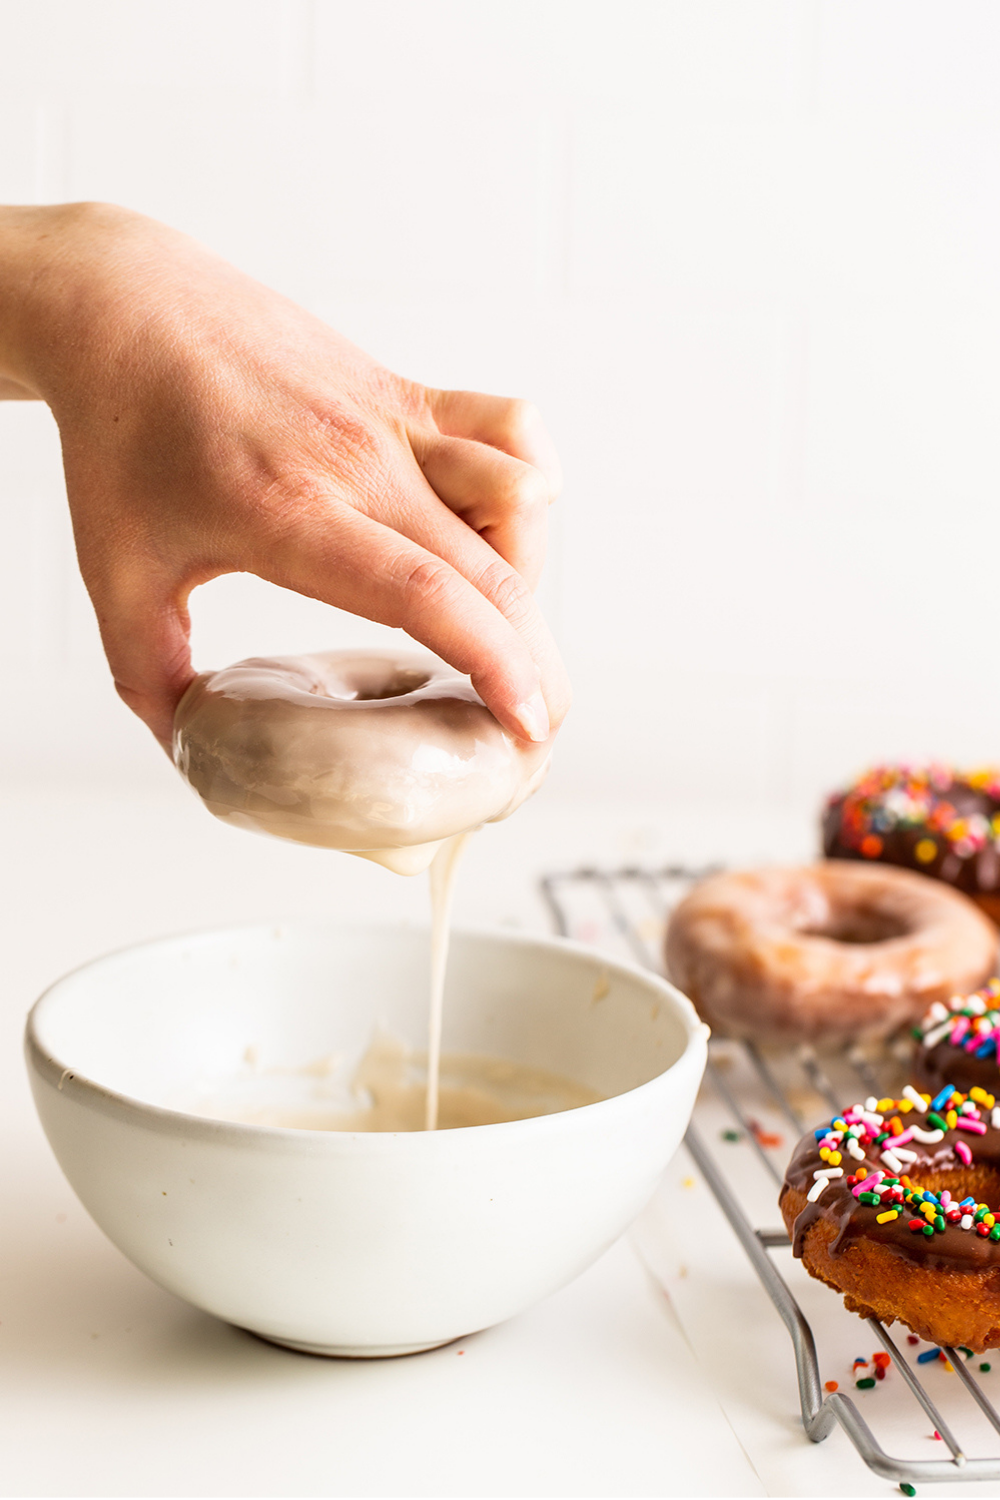 a hand dipping a donut into a bowl of glaze and allowing the excess to drip back into the bowl.